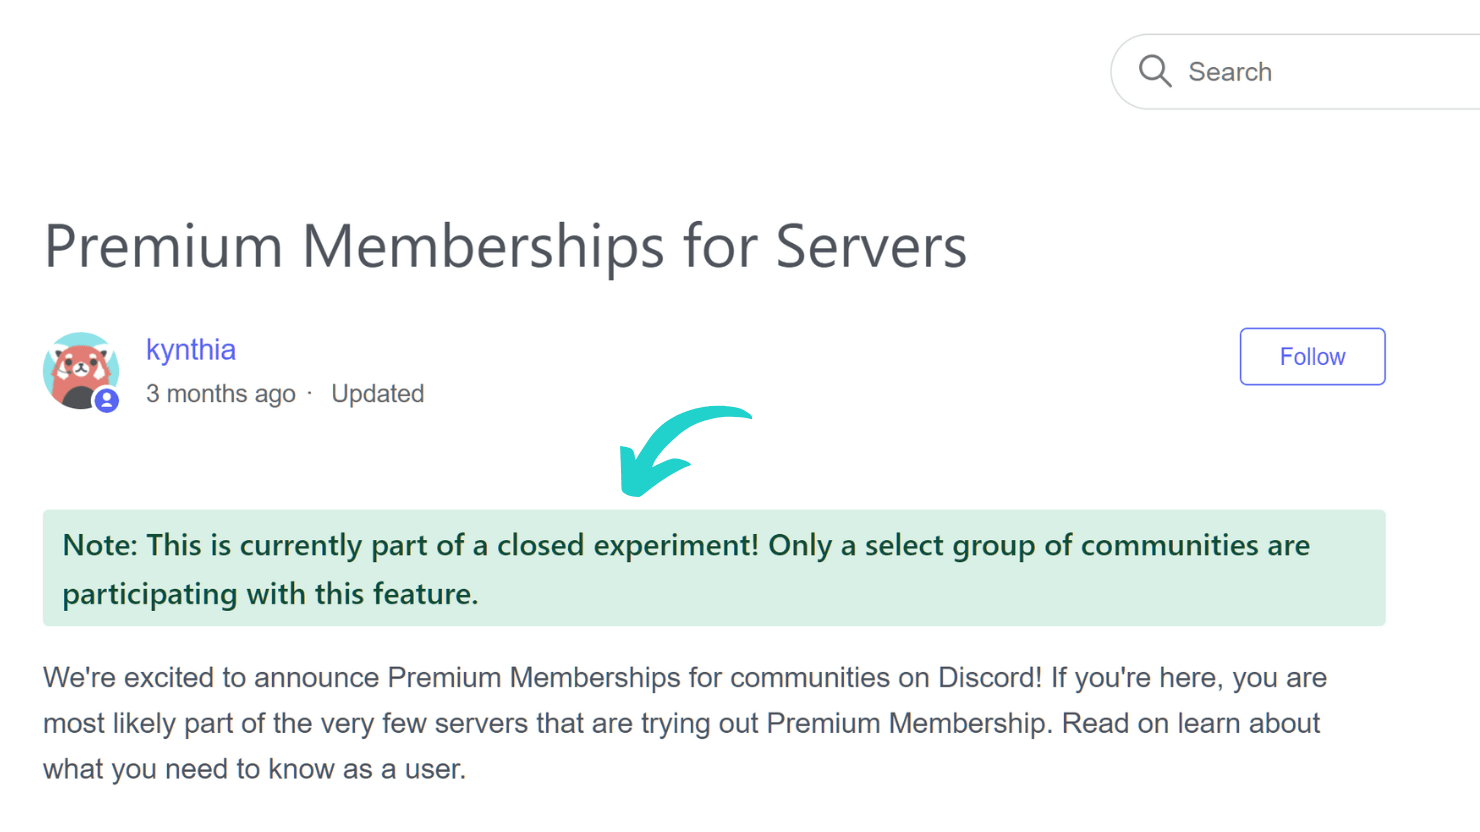 Connect MemberPress to Discord with this Free Plugin